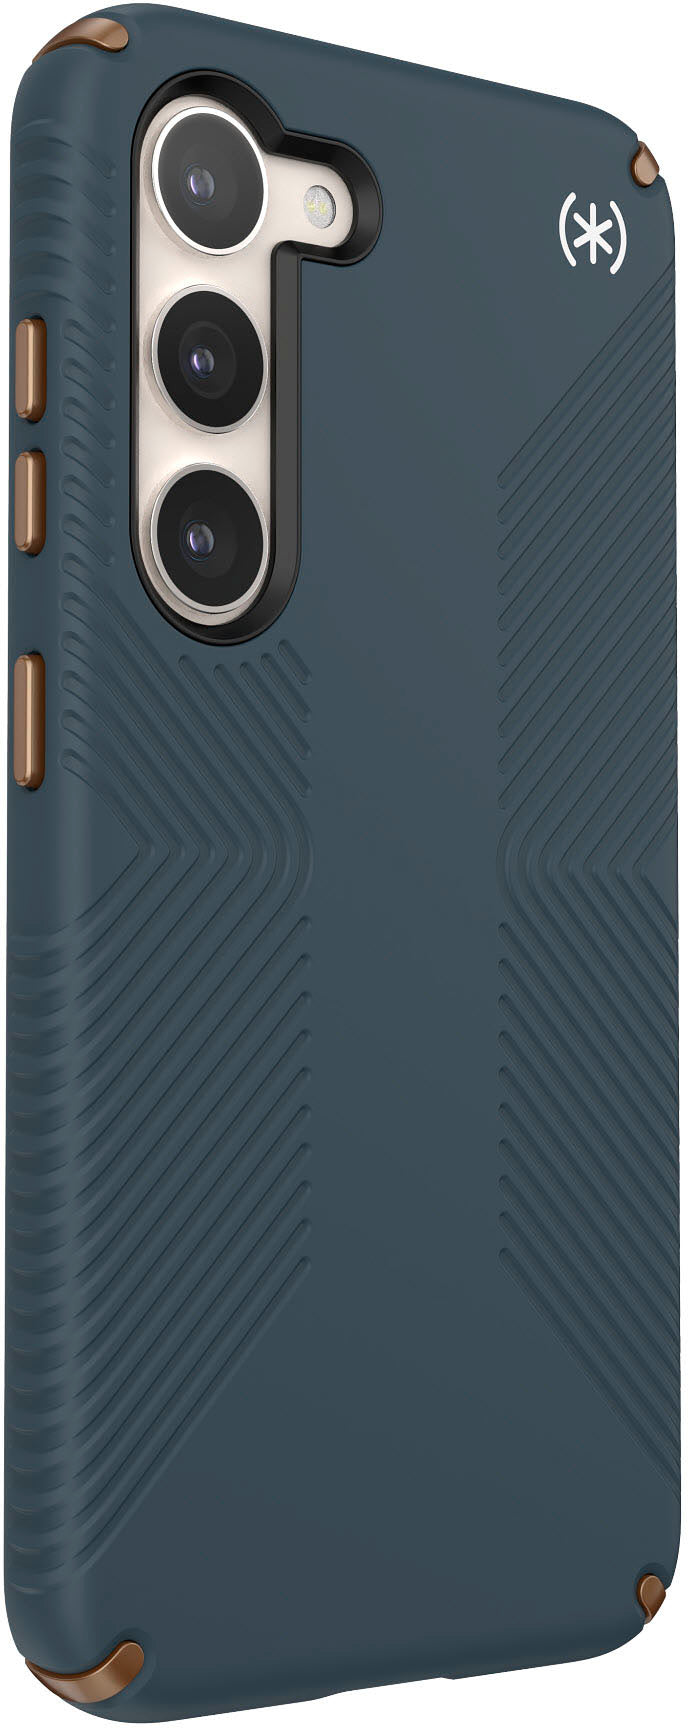 Speck - Presidio2 Grip Case for Samsung Galaxy S23 - Charcoal Grey/Cool Bronze/White_2